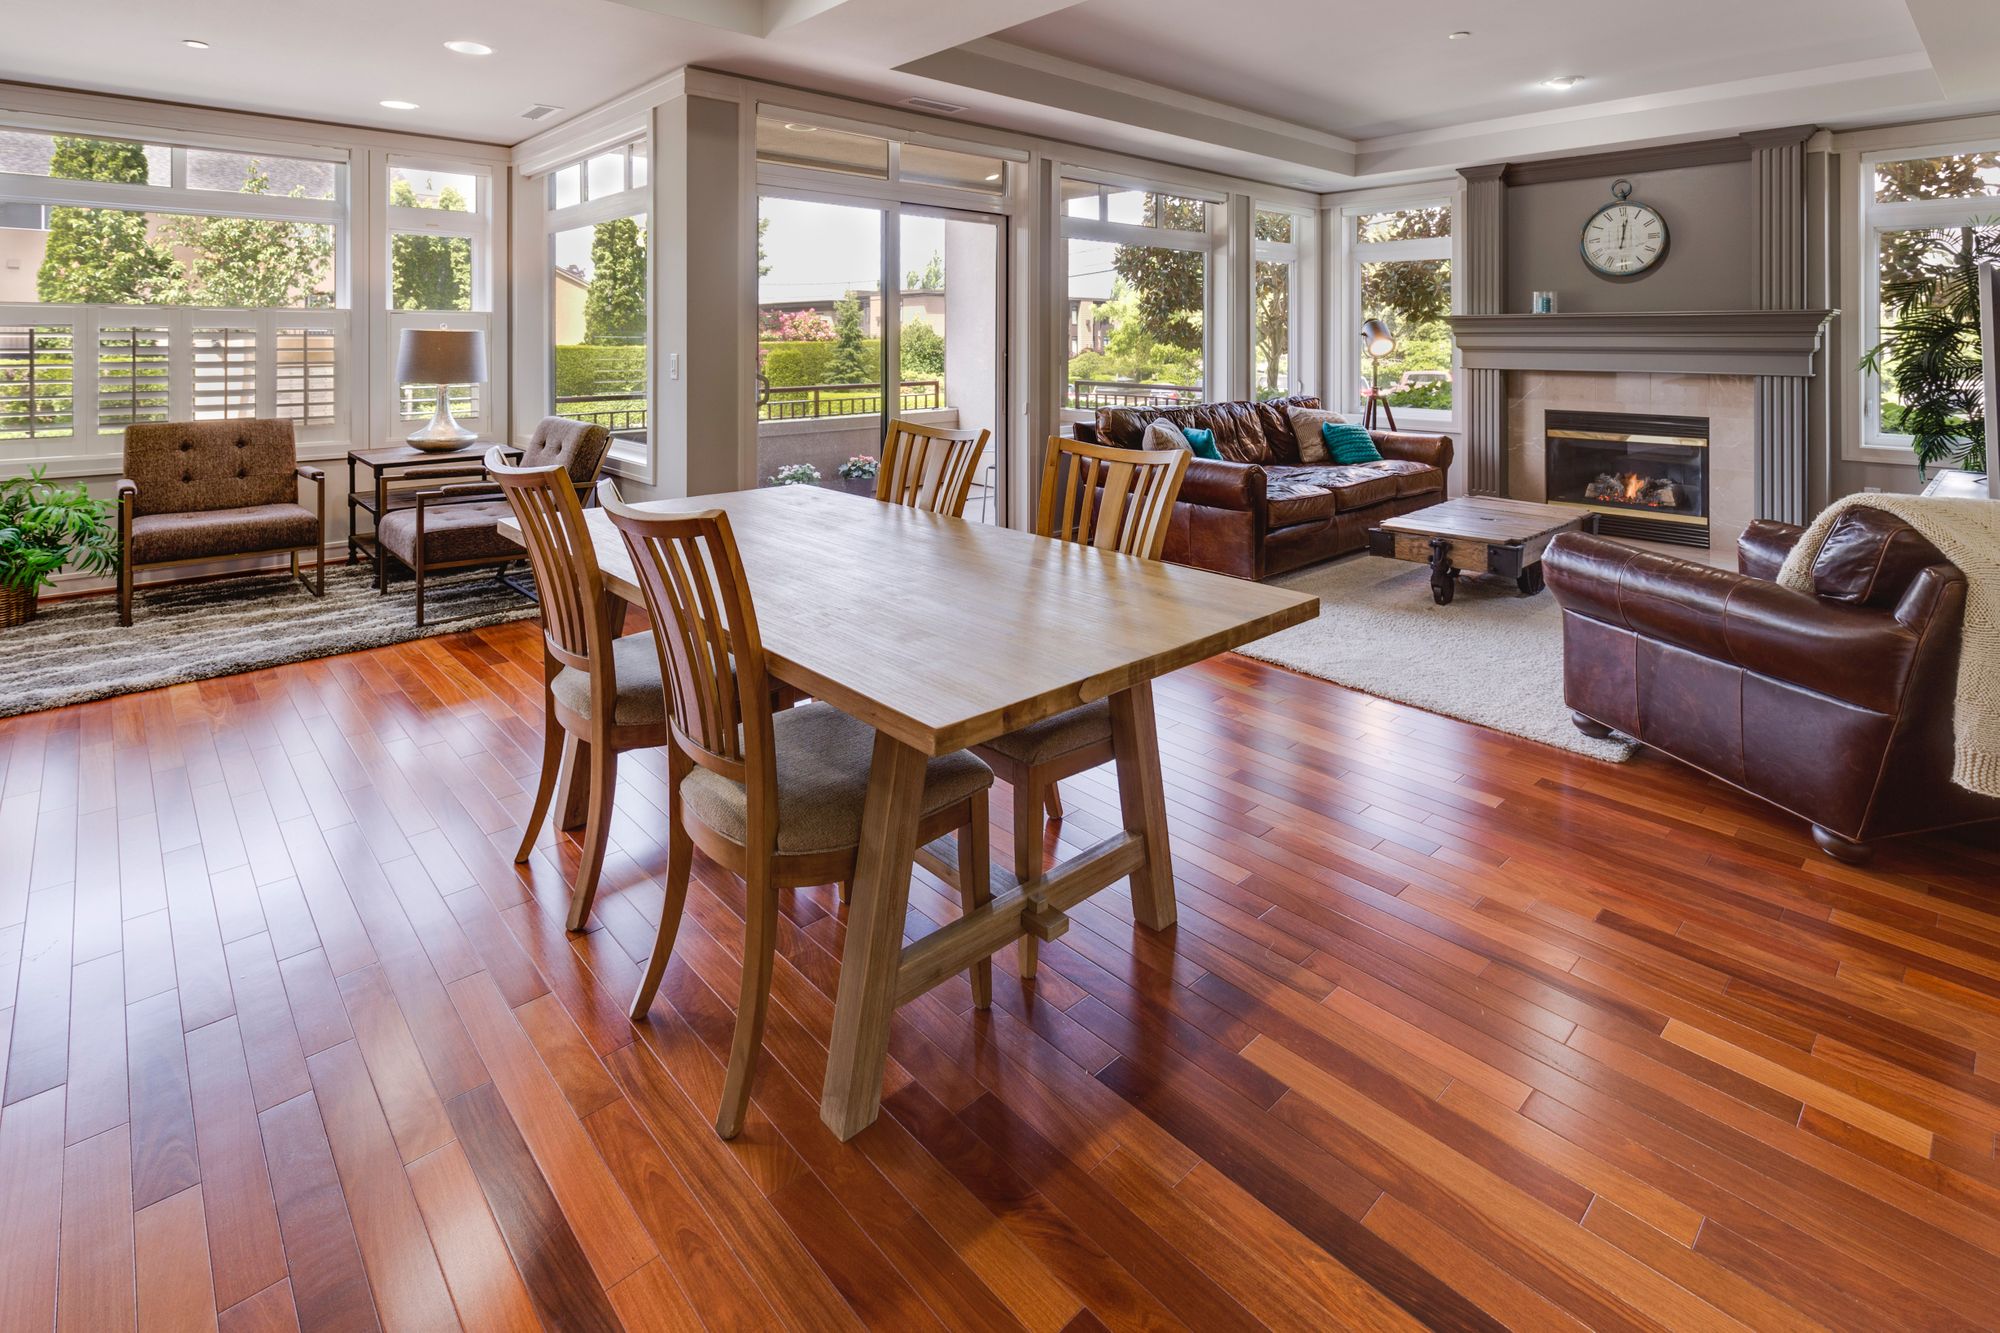 Do Hardwood Floors Increase Home Value, How Much Does It Cost To Install 500 Square Feet Of Hardwood Floors